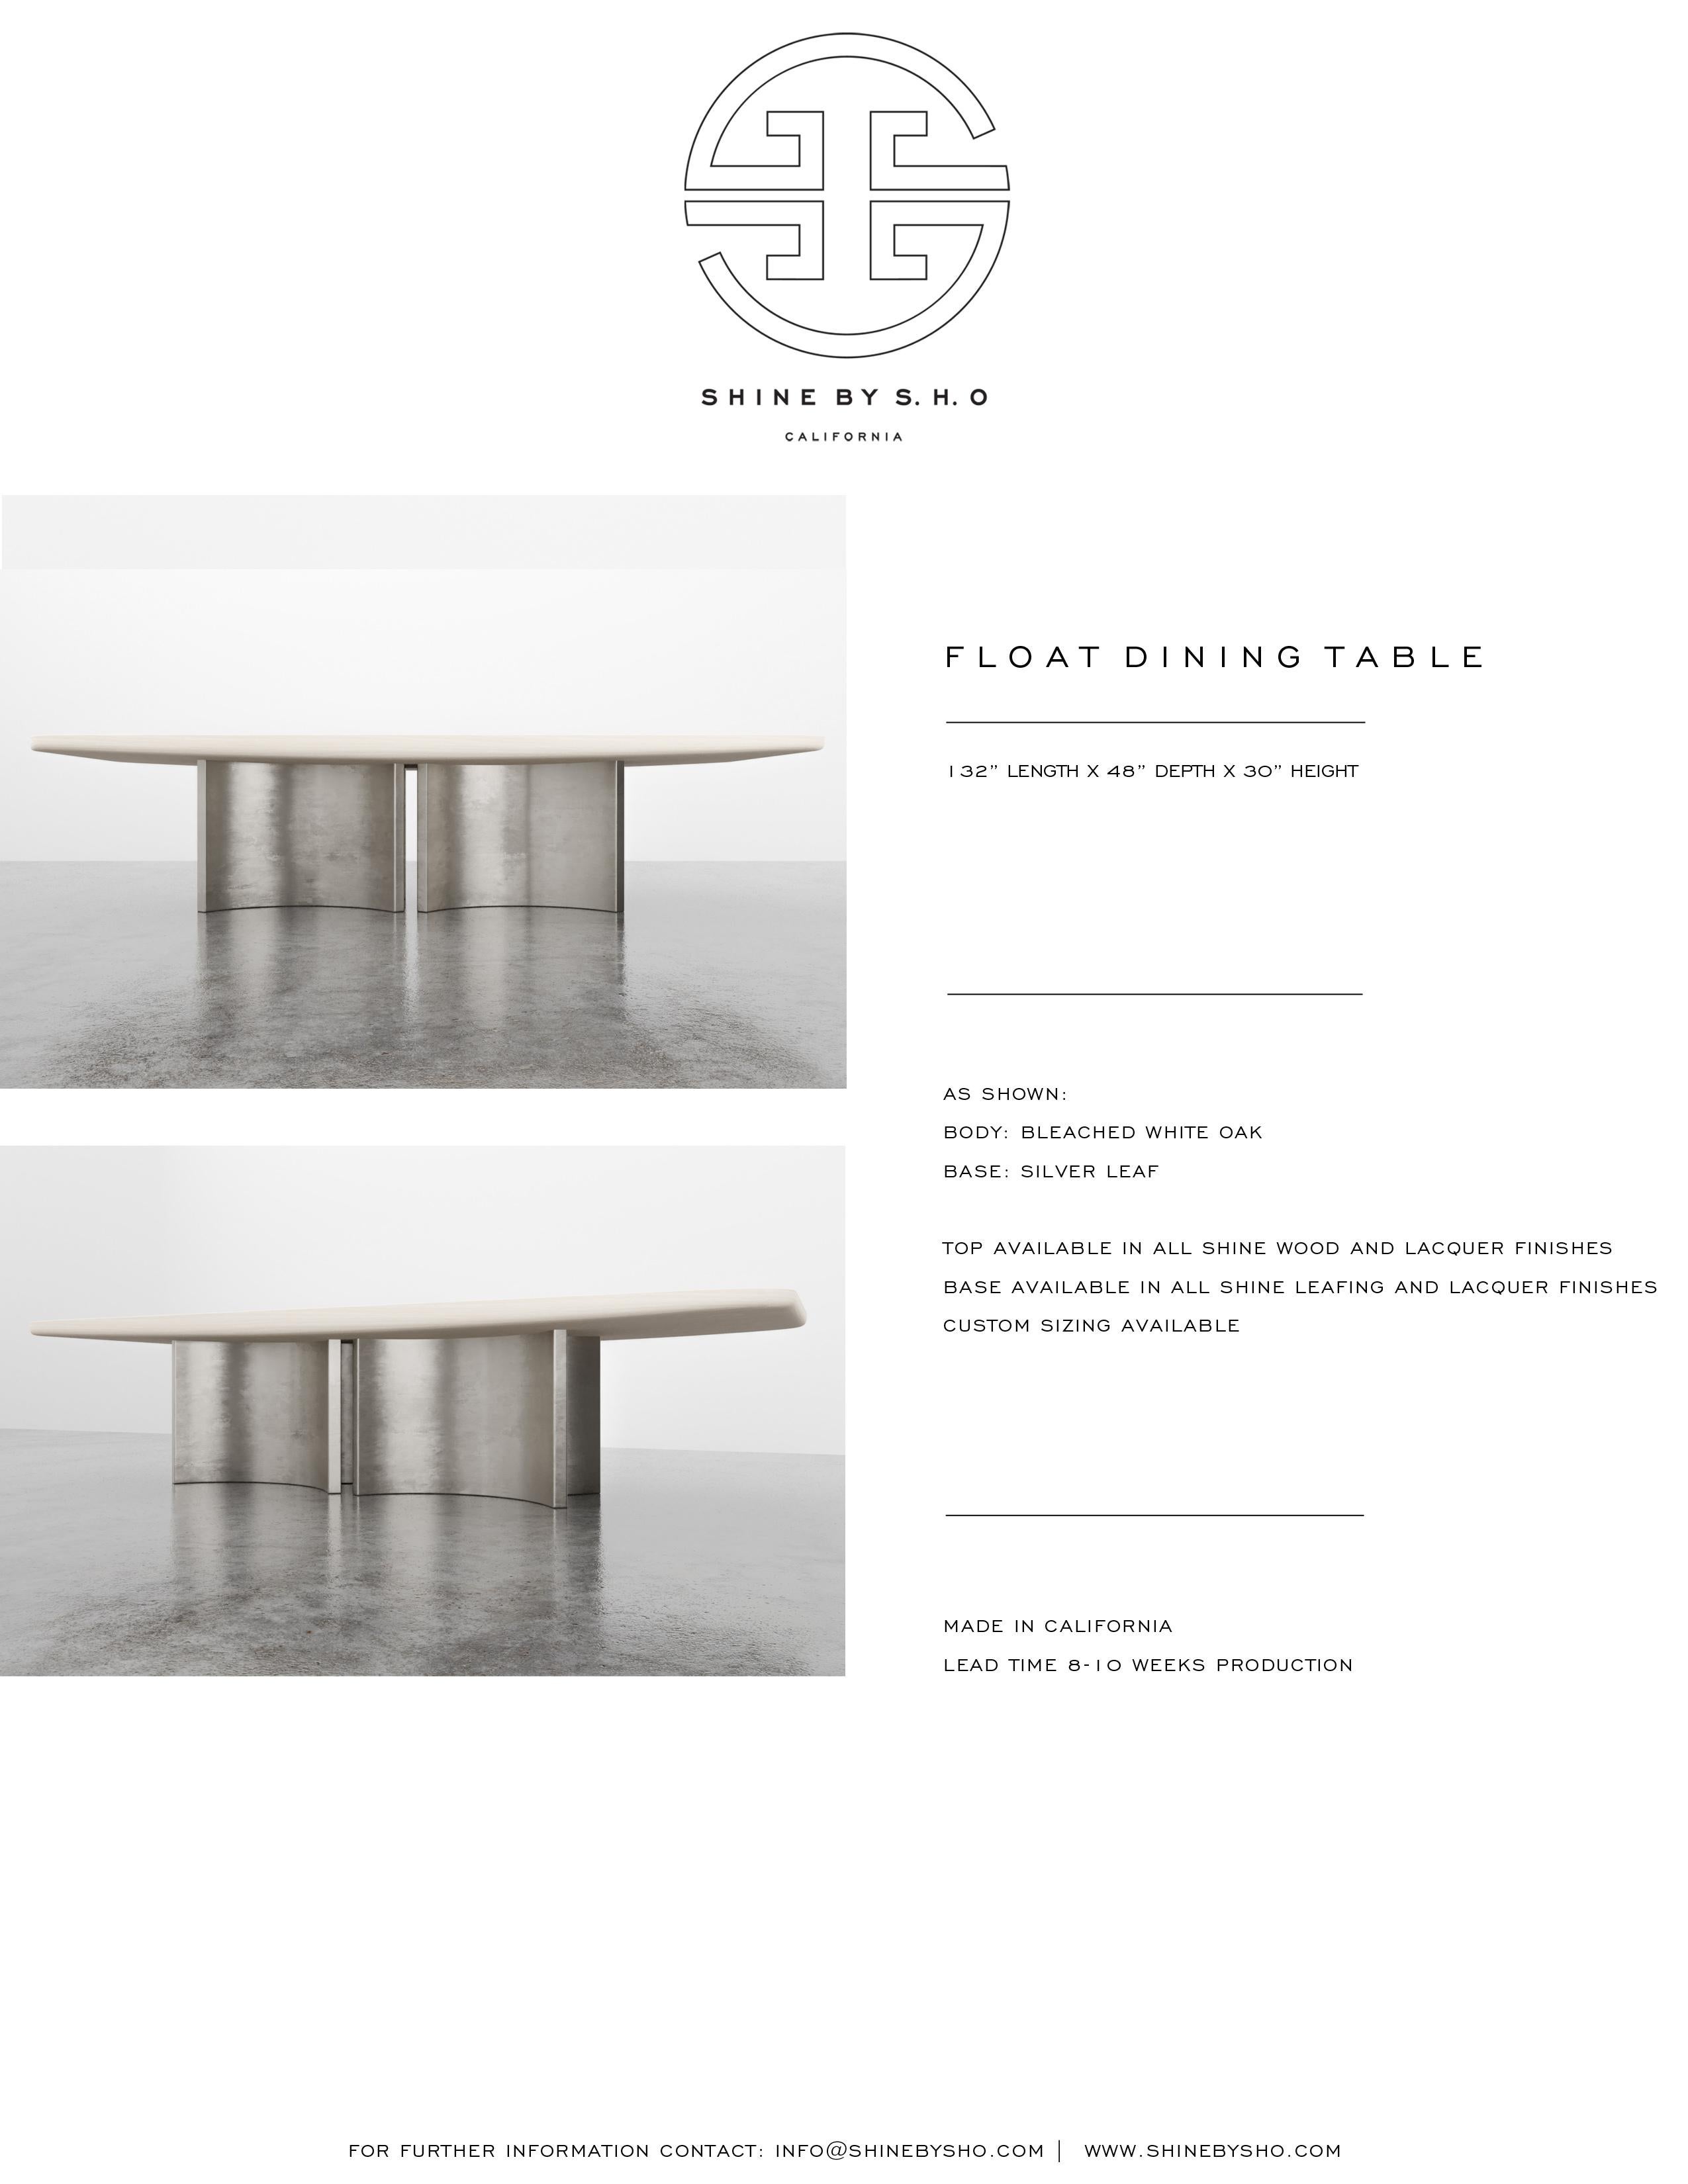 Contemporary FLOAT DINING TABLE - Modern Bleached White Oak Dining Table w/ Silver Leaf Bases For Sale